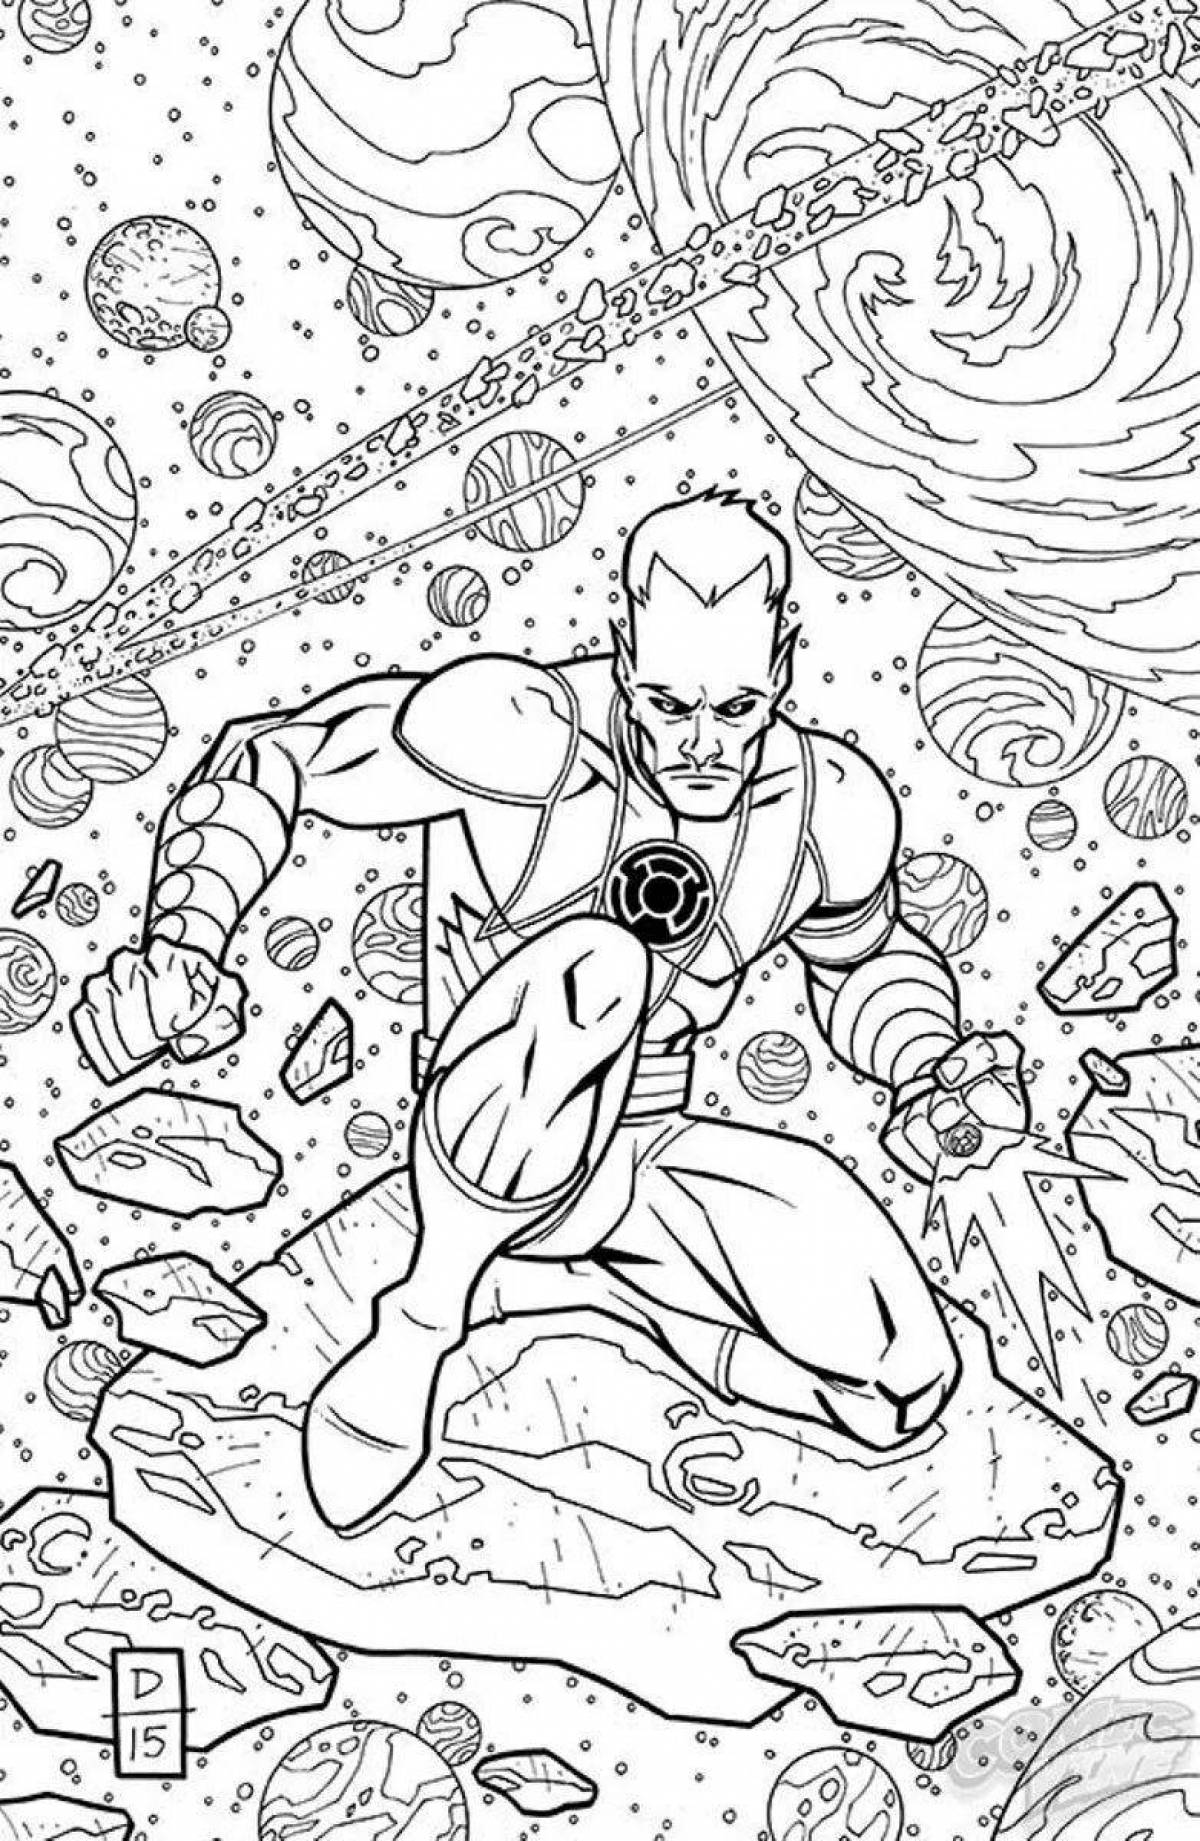 Flawless Green Lantern coloring page